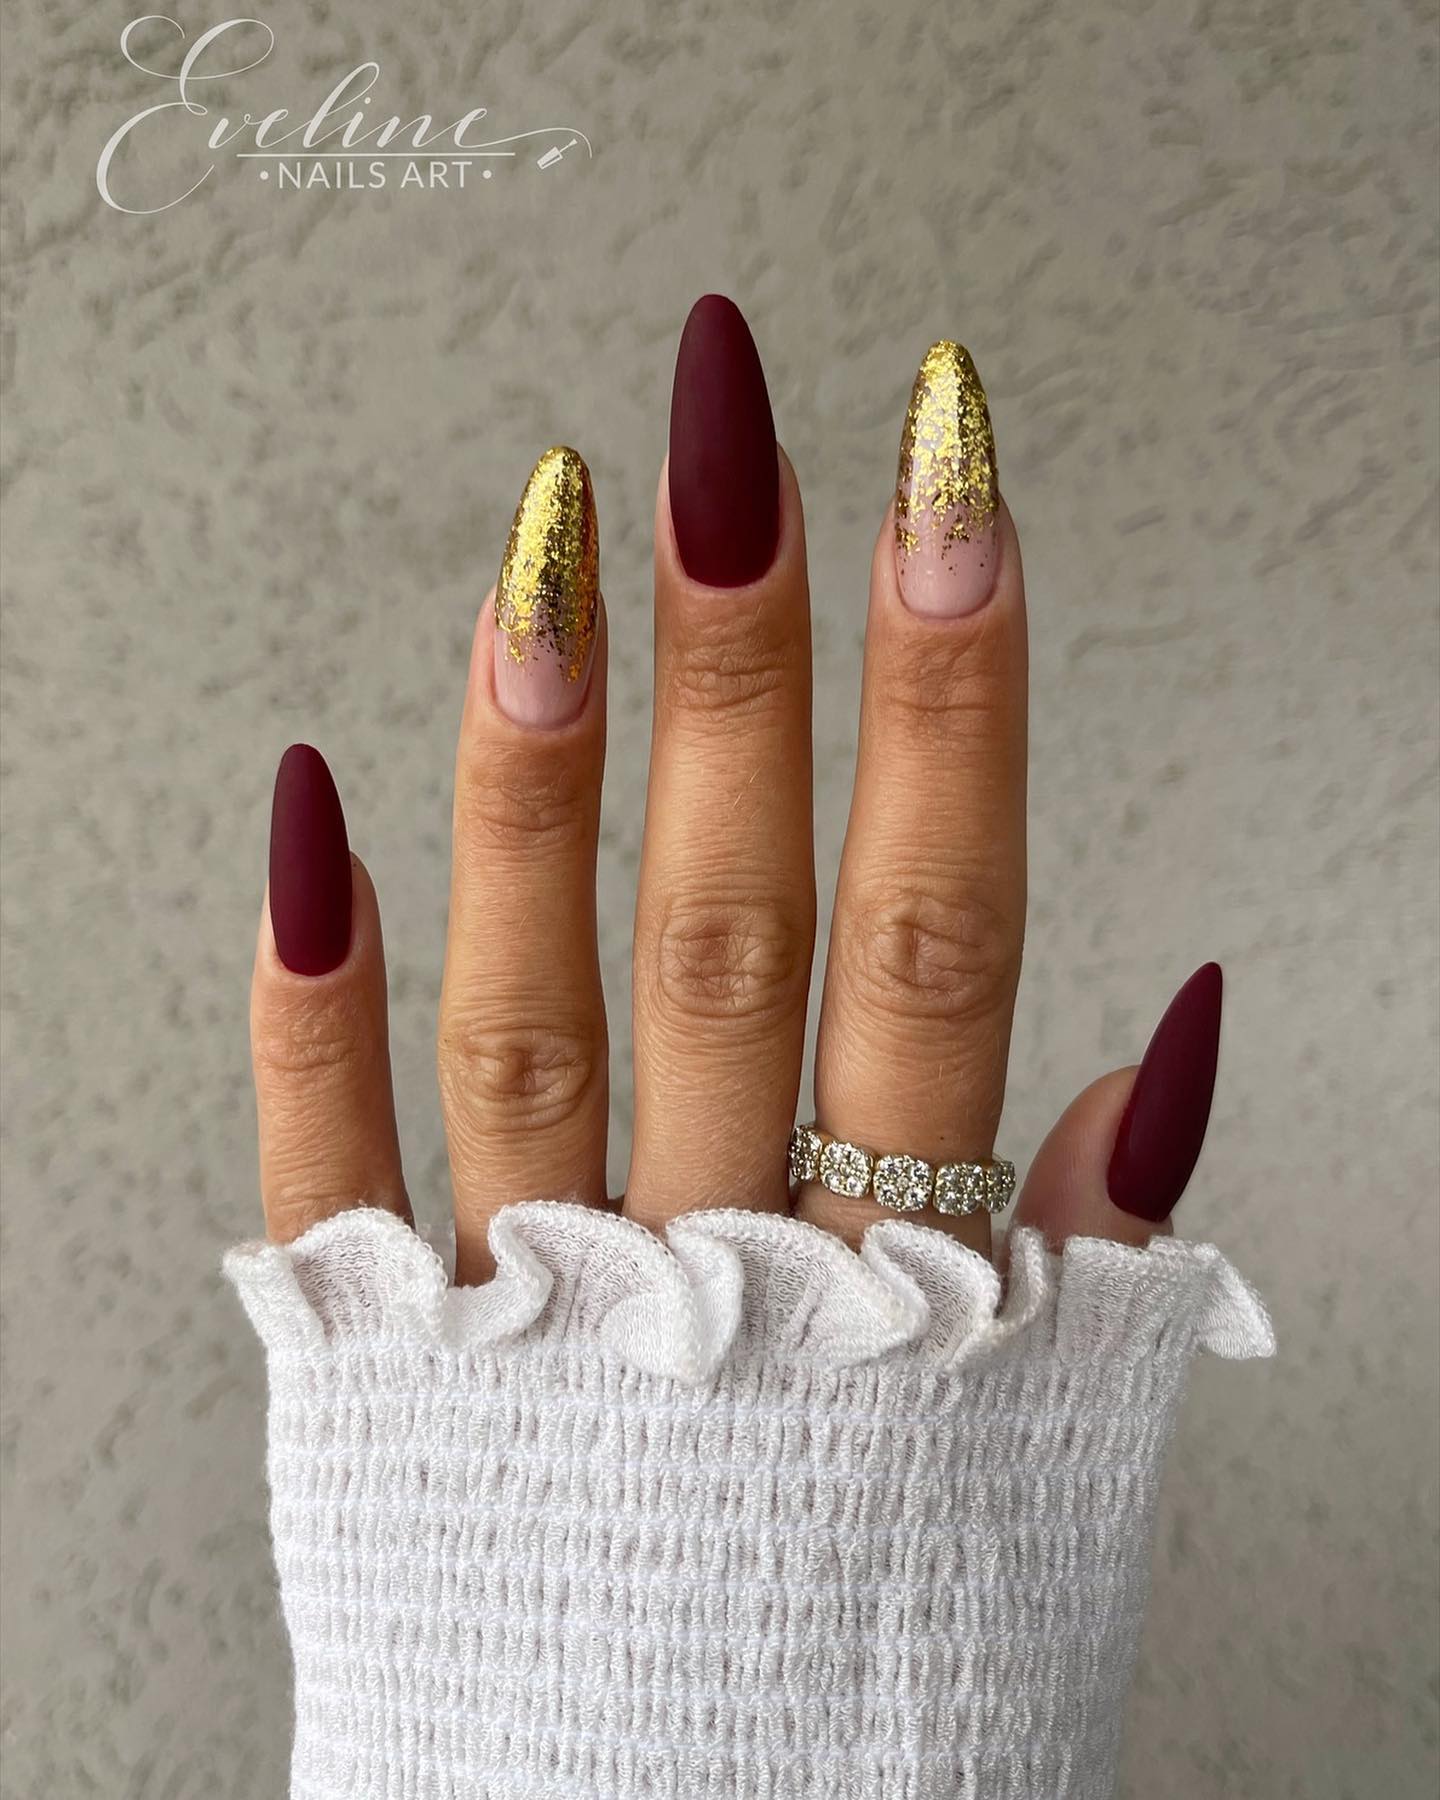 Long Dark Red Nails with Gold Glitter